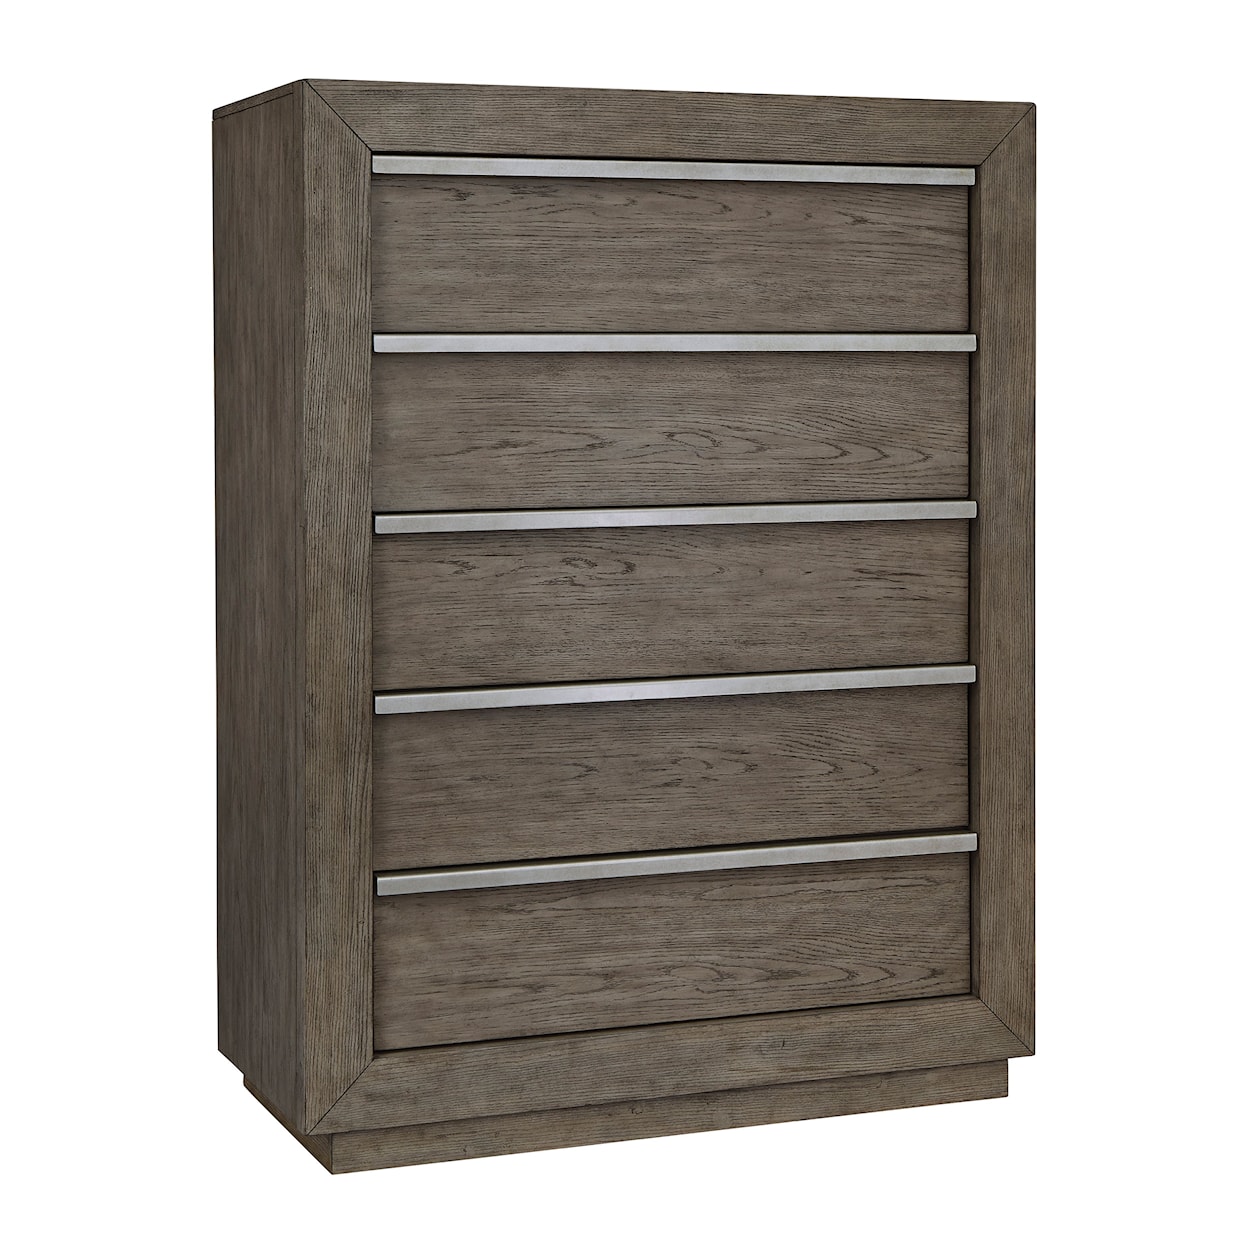 Benchcraft Anibecca Chest of Drawers